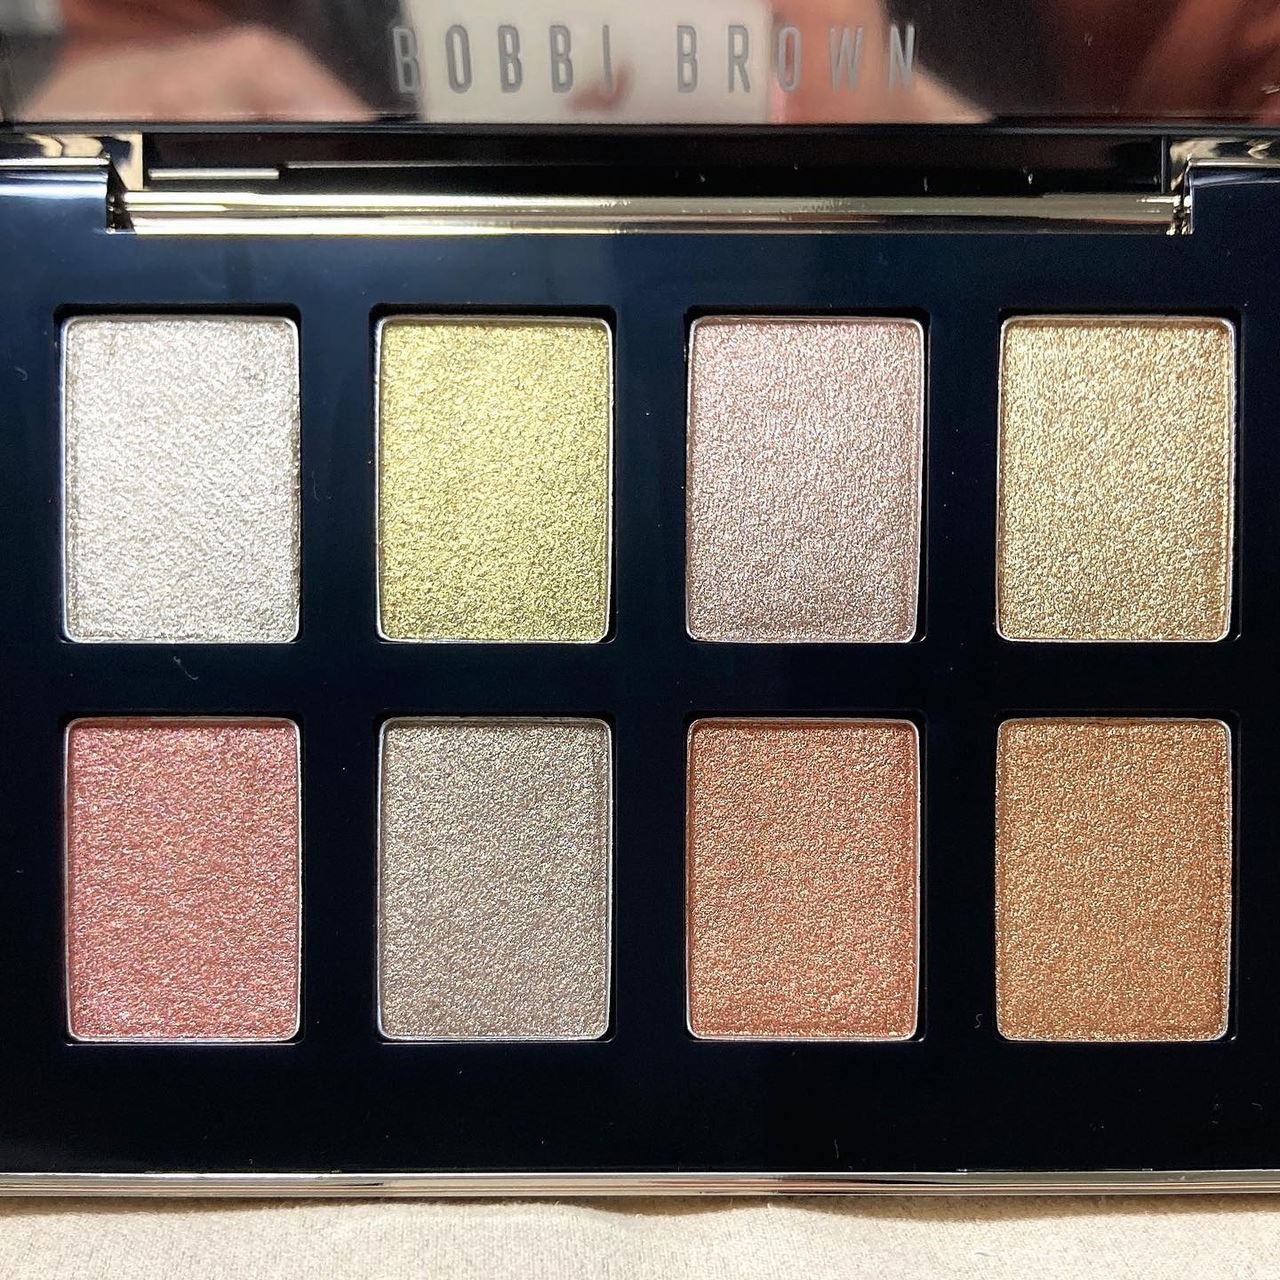 Bobbi Brown Luxe Precious Metals Eyeshadow Palette Christmas Holiday 2021 - Swatches